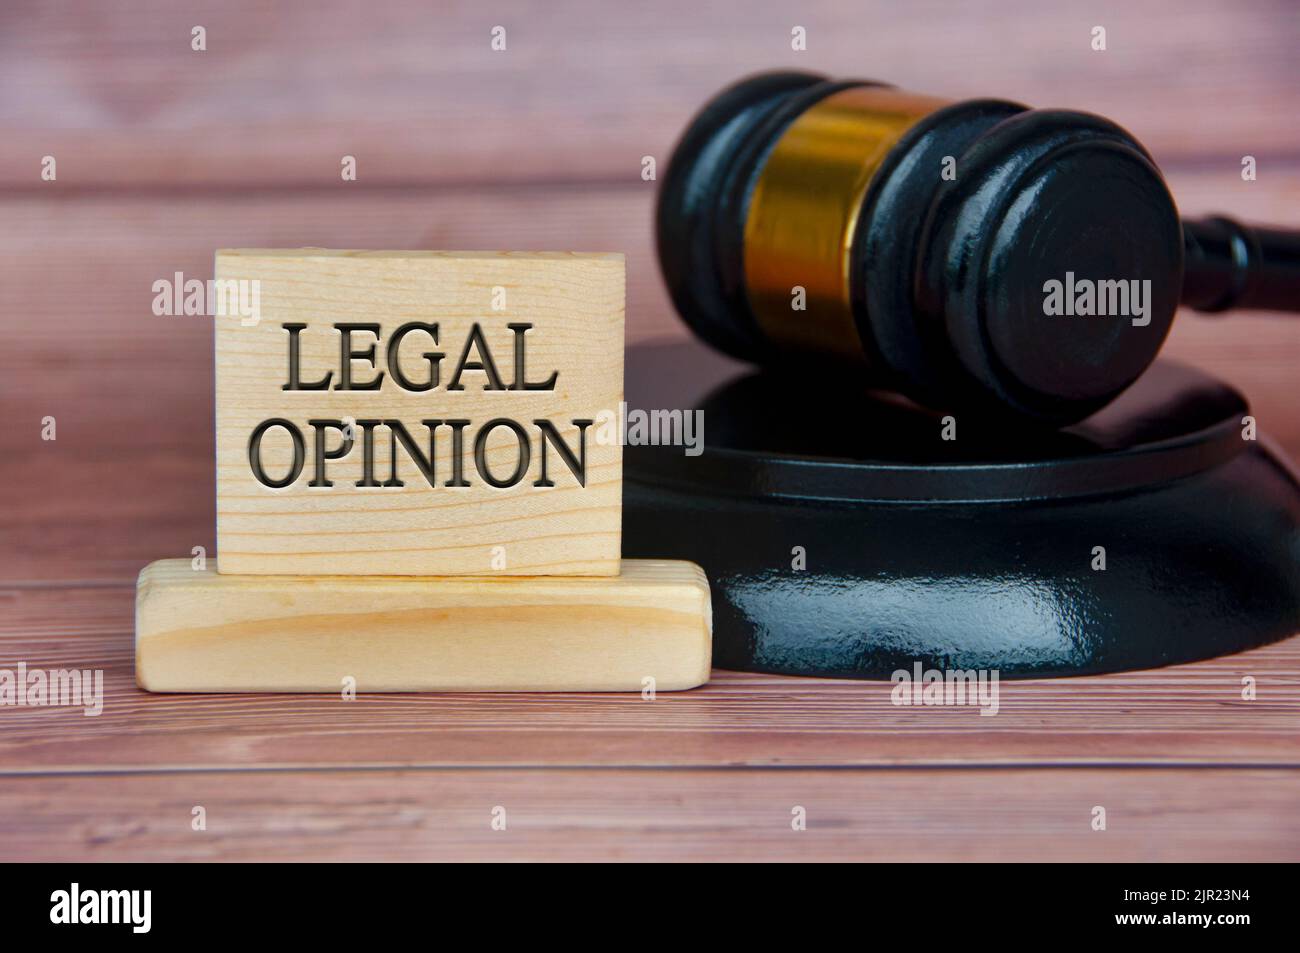 Legal opinion text engraved on wooden block with gavel background. Legal and law concept. Stock Photo